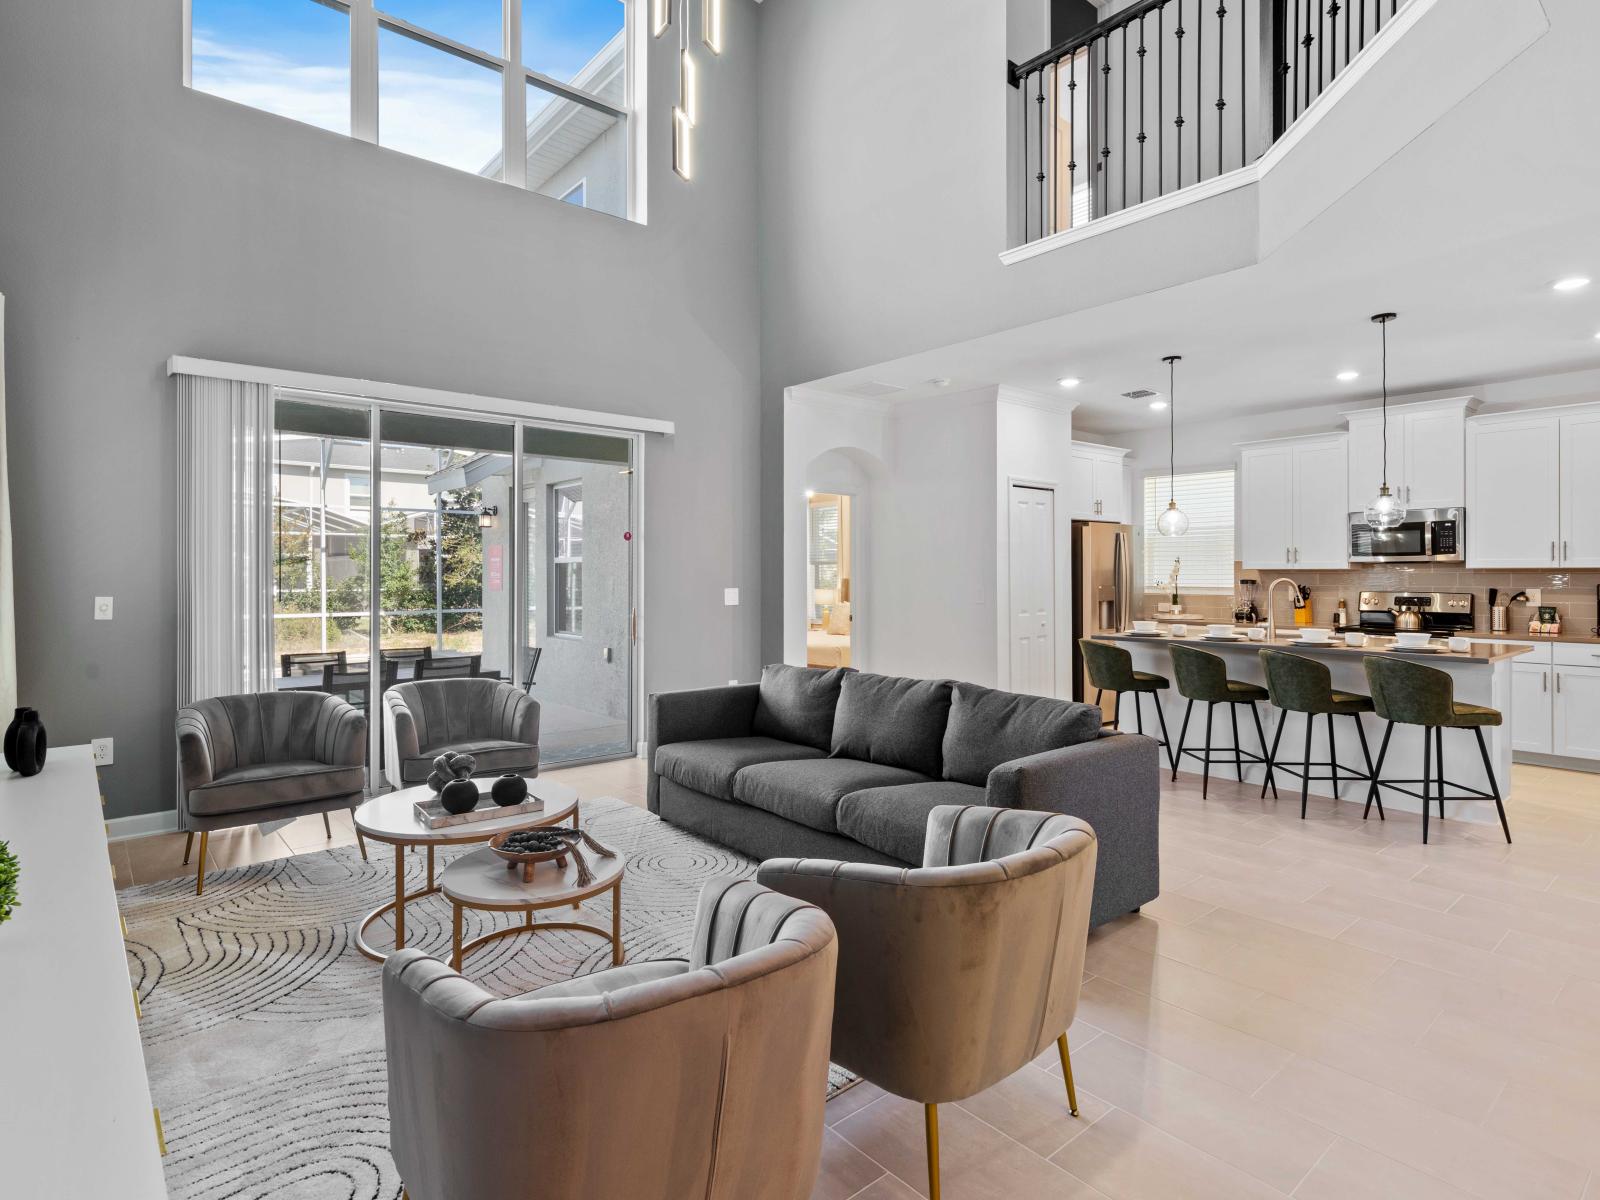 Spacious Living Area of the Home in Davenport Florida - Experience the epitome of elegance in living area - Every detail is curated for a luxurious and indulgent escape  - Smart TV and Netflix - Access to outdoors with pool and seating